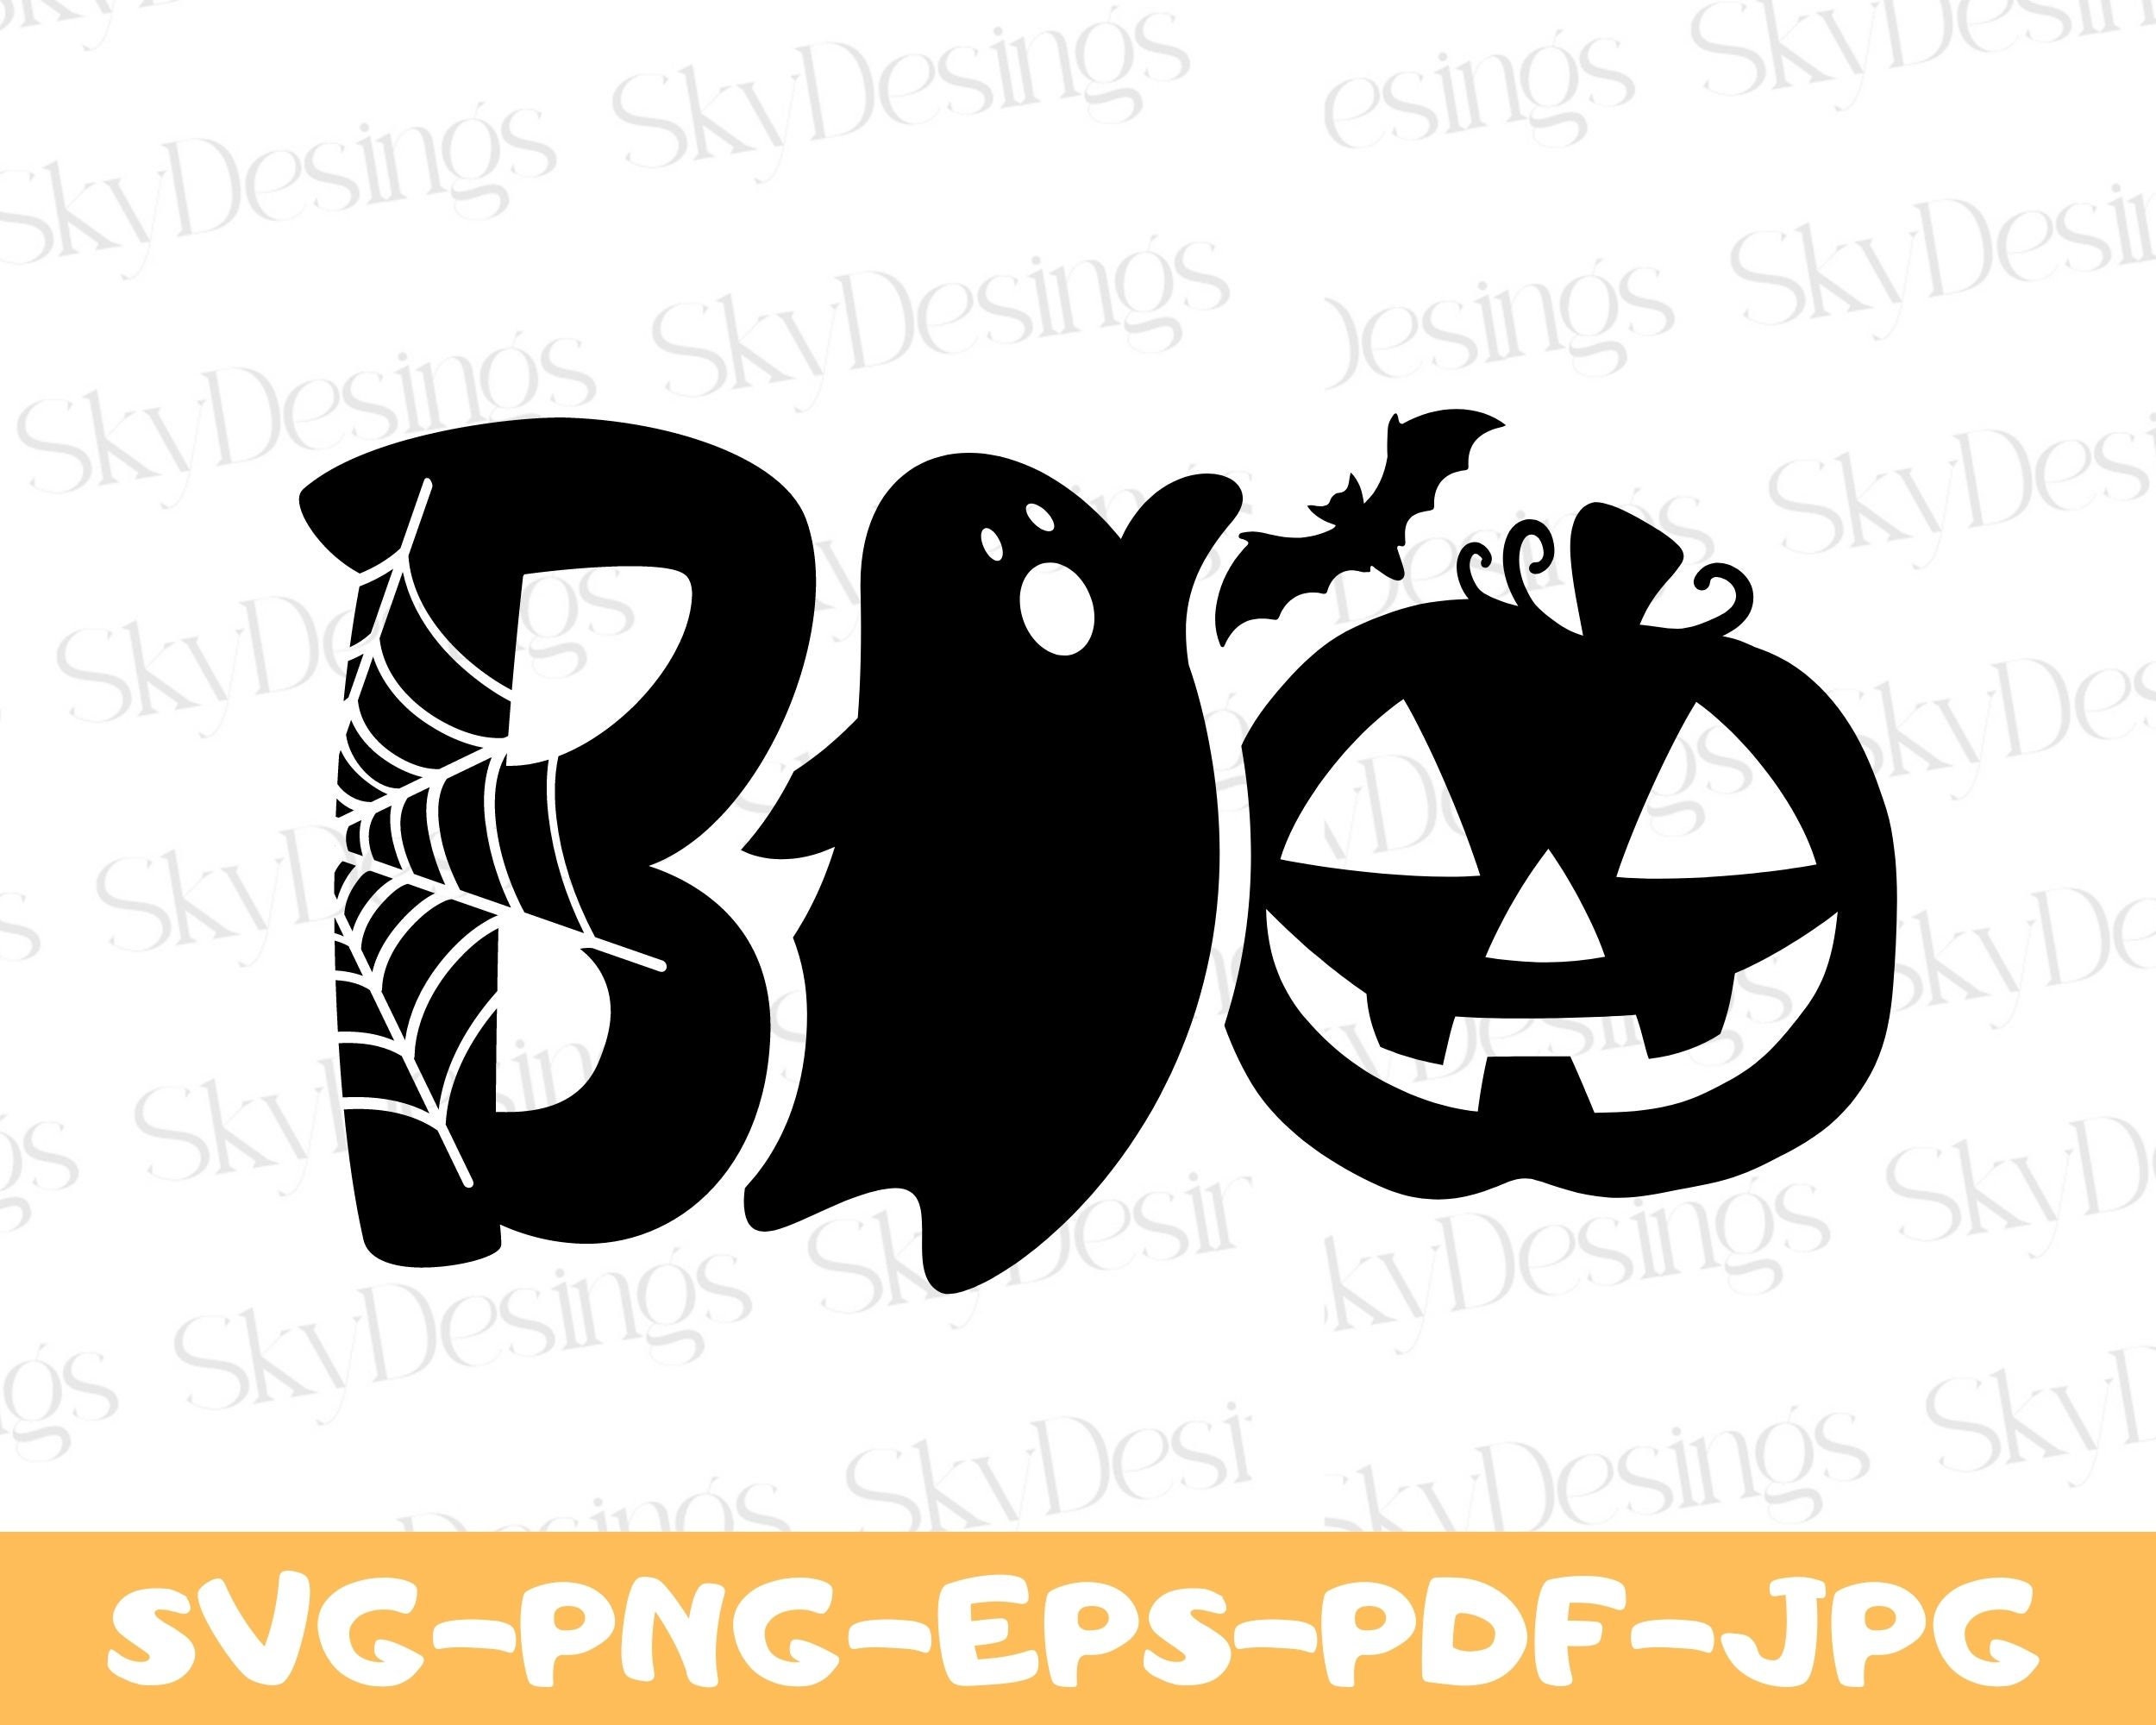 Ghost Card Retro Western Halloween PNG Graphic by Flora Co Studio